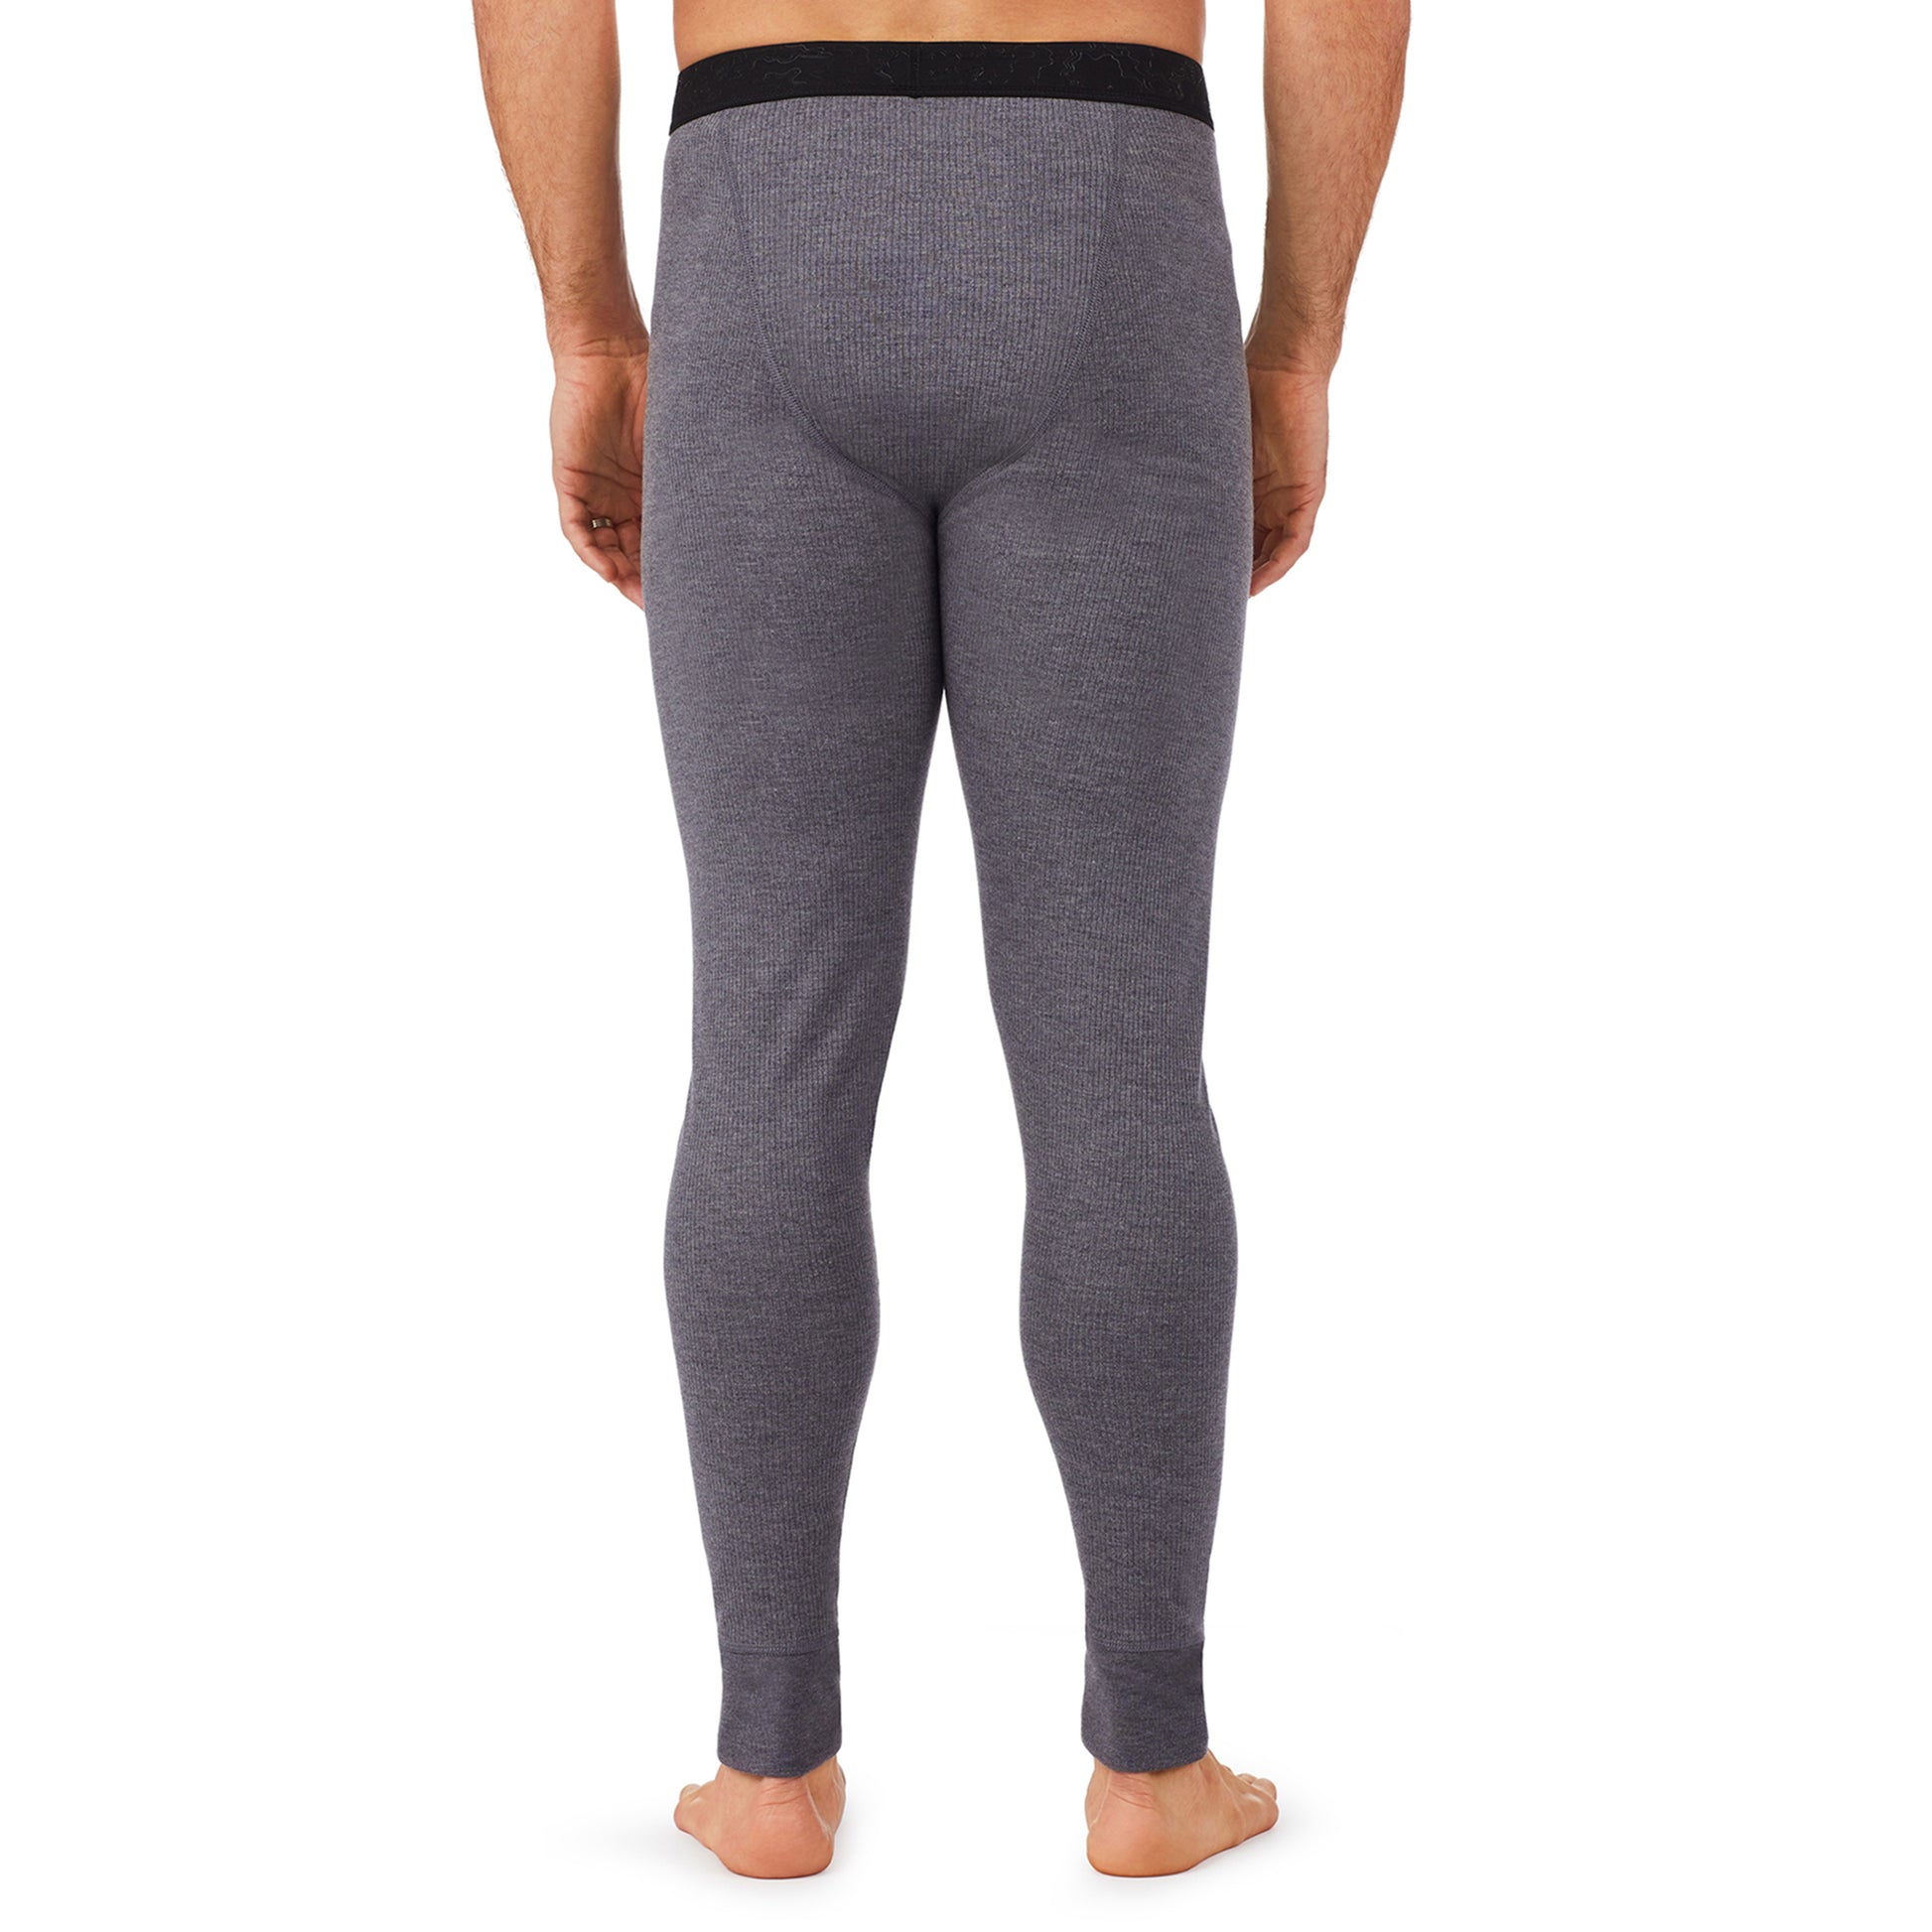 Charcoal Heather; Model is wearing size M. He is 6'1", Waist 31", Inseam 33".@lower body of A man wearing grey pant